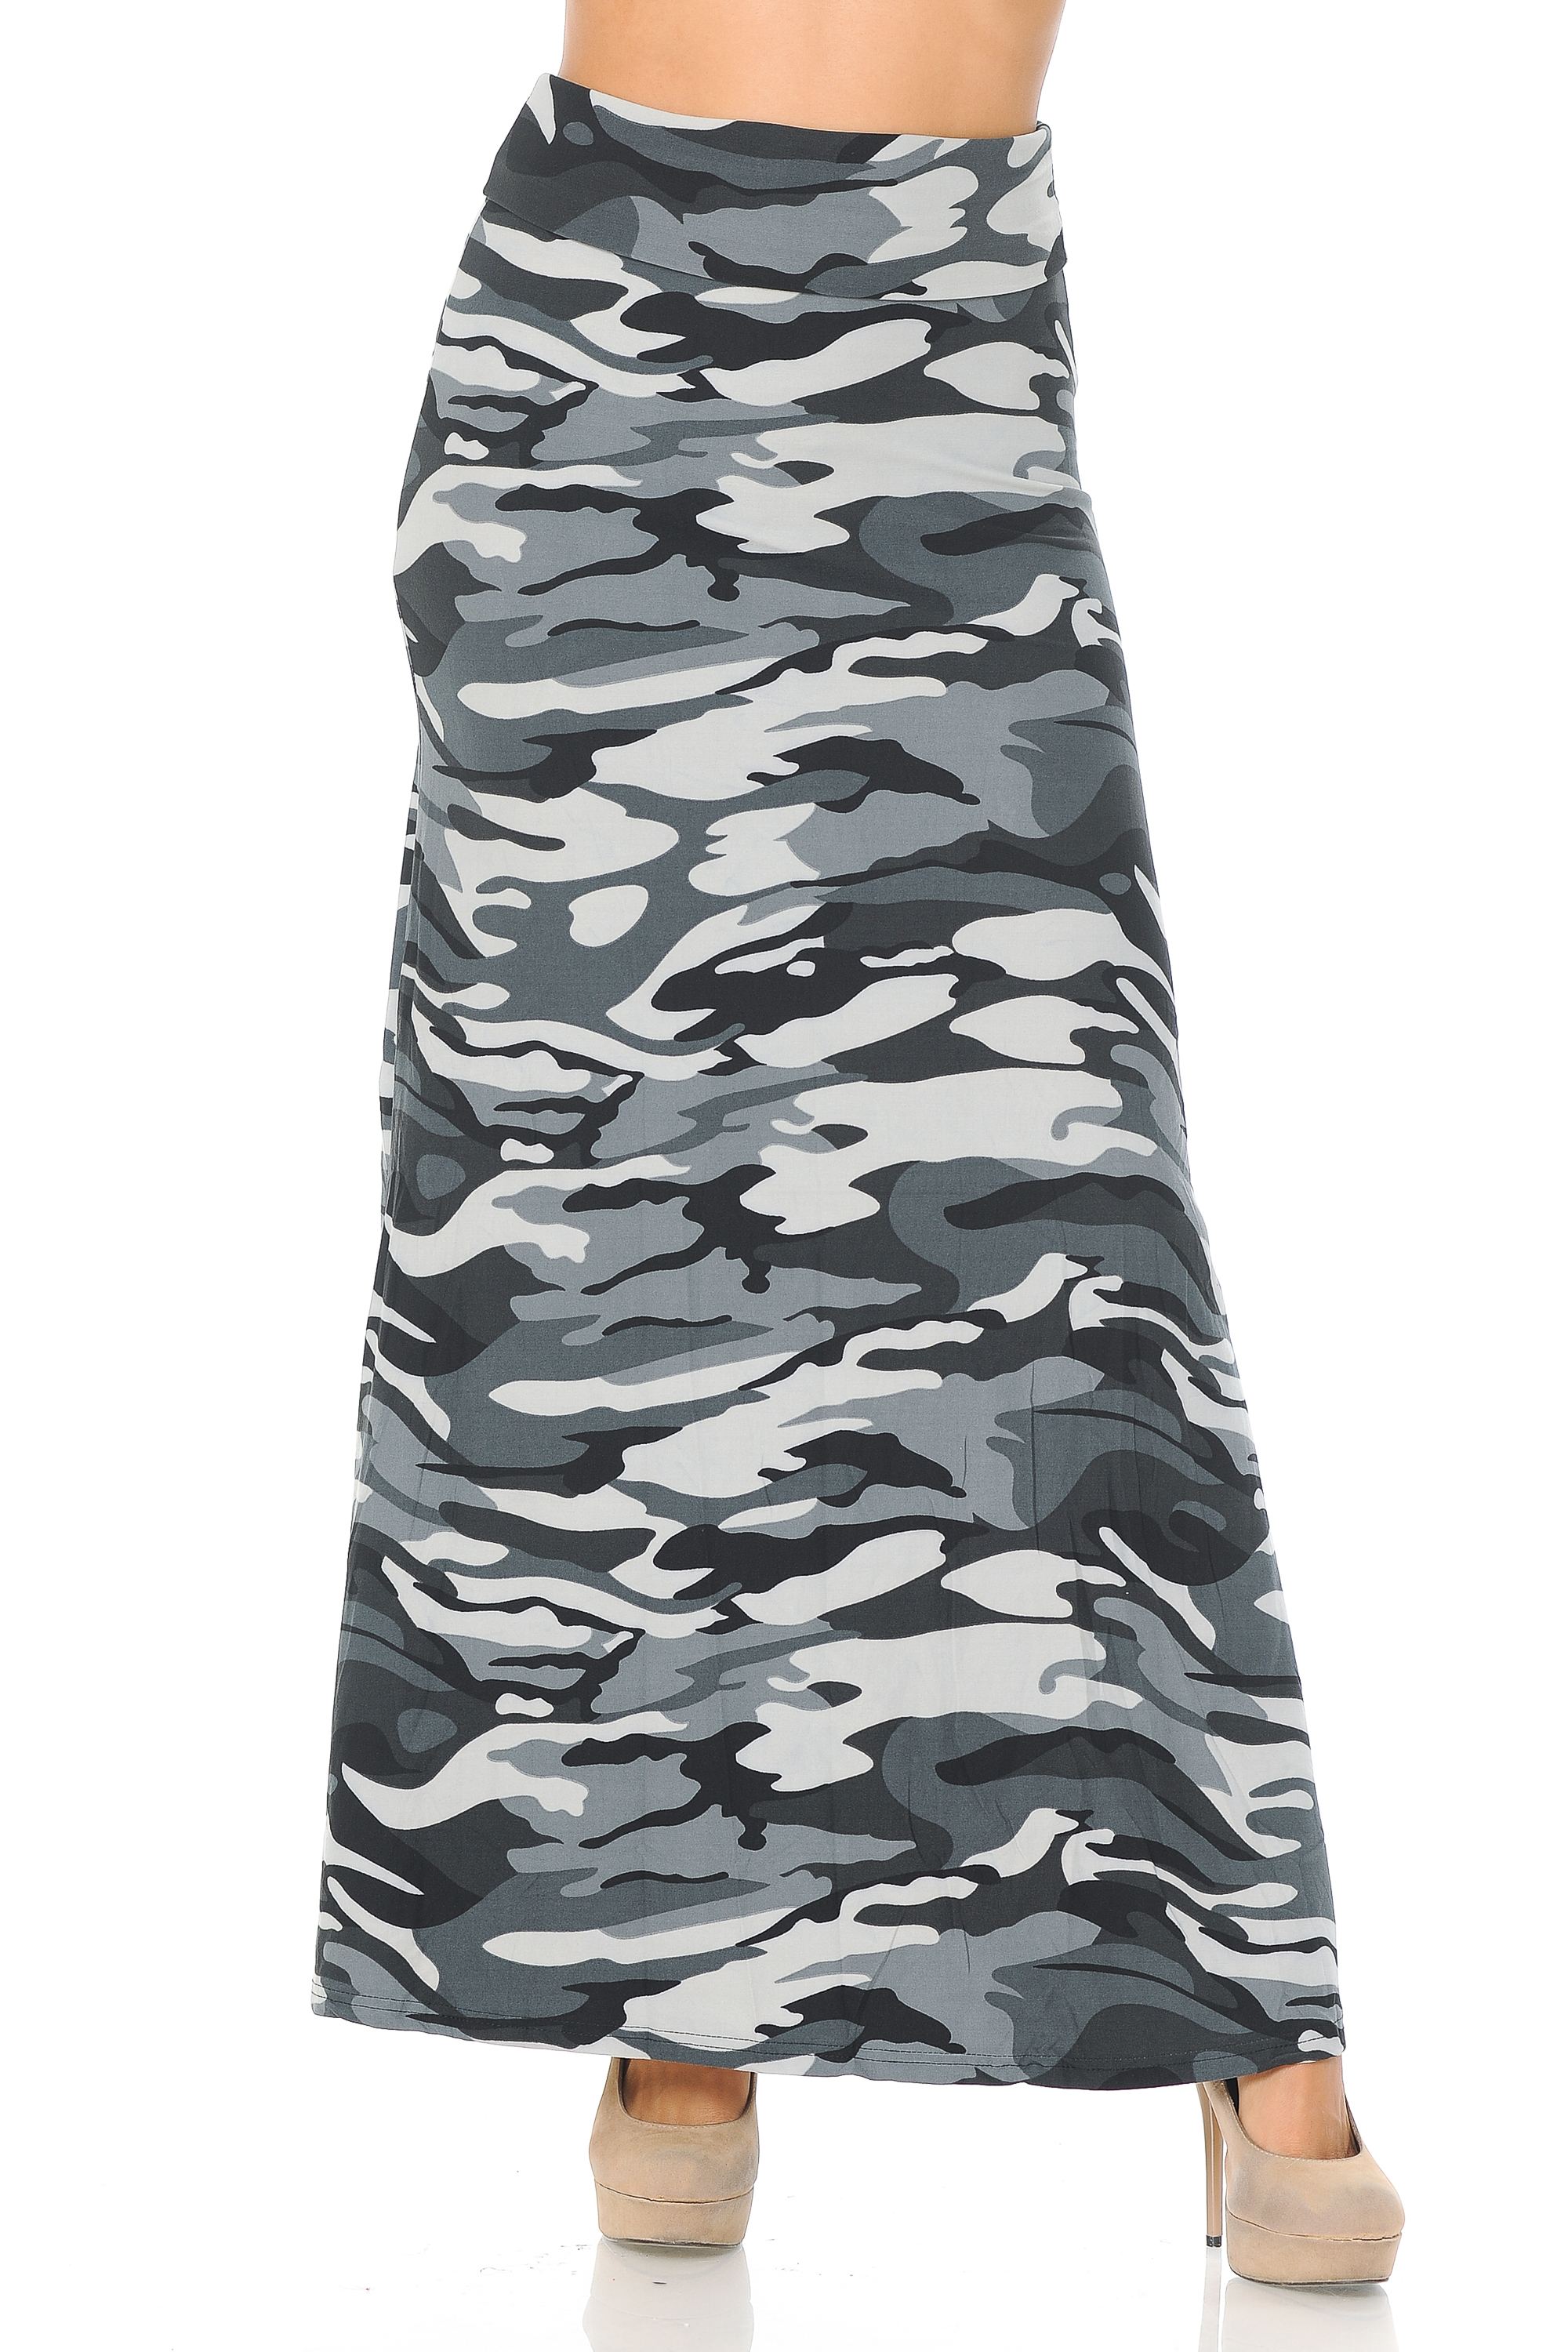 Wholesale Buttery Smooth Charcoal Camouflage Maxi Skirt